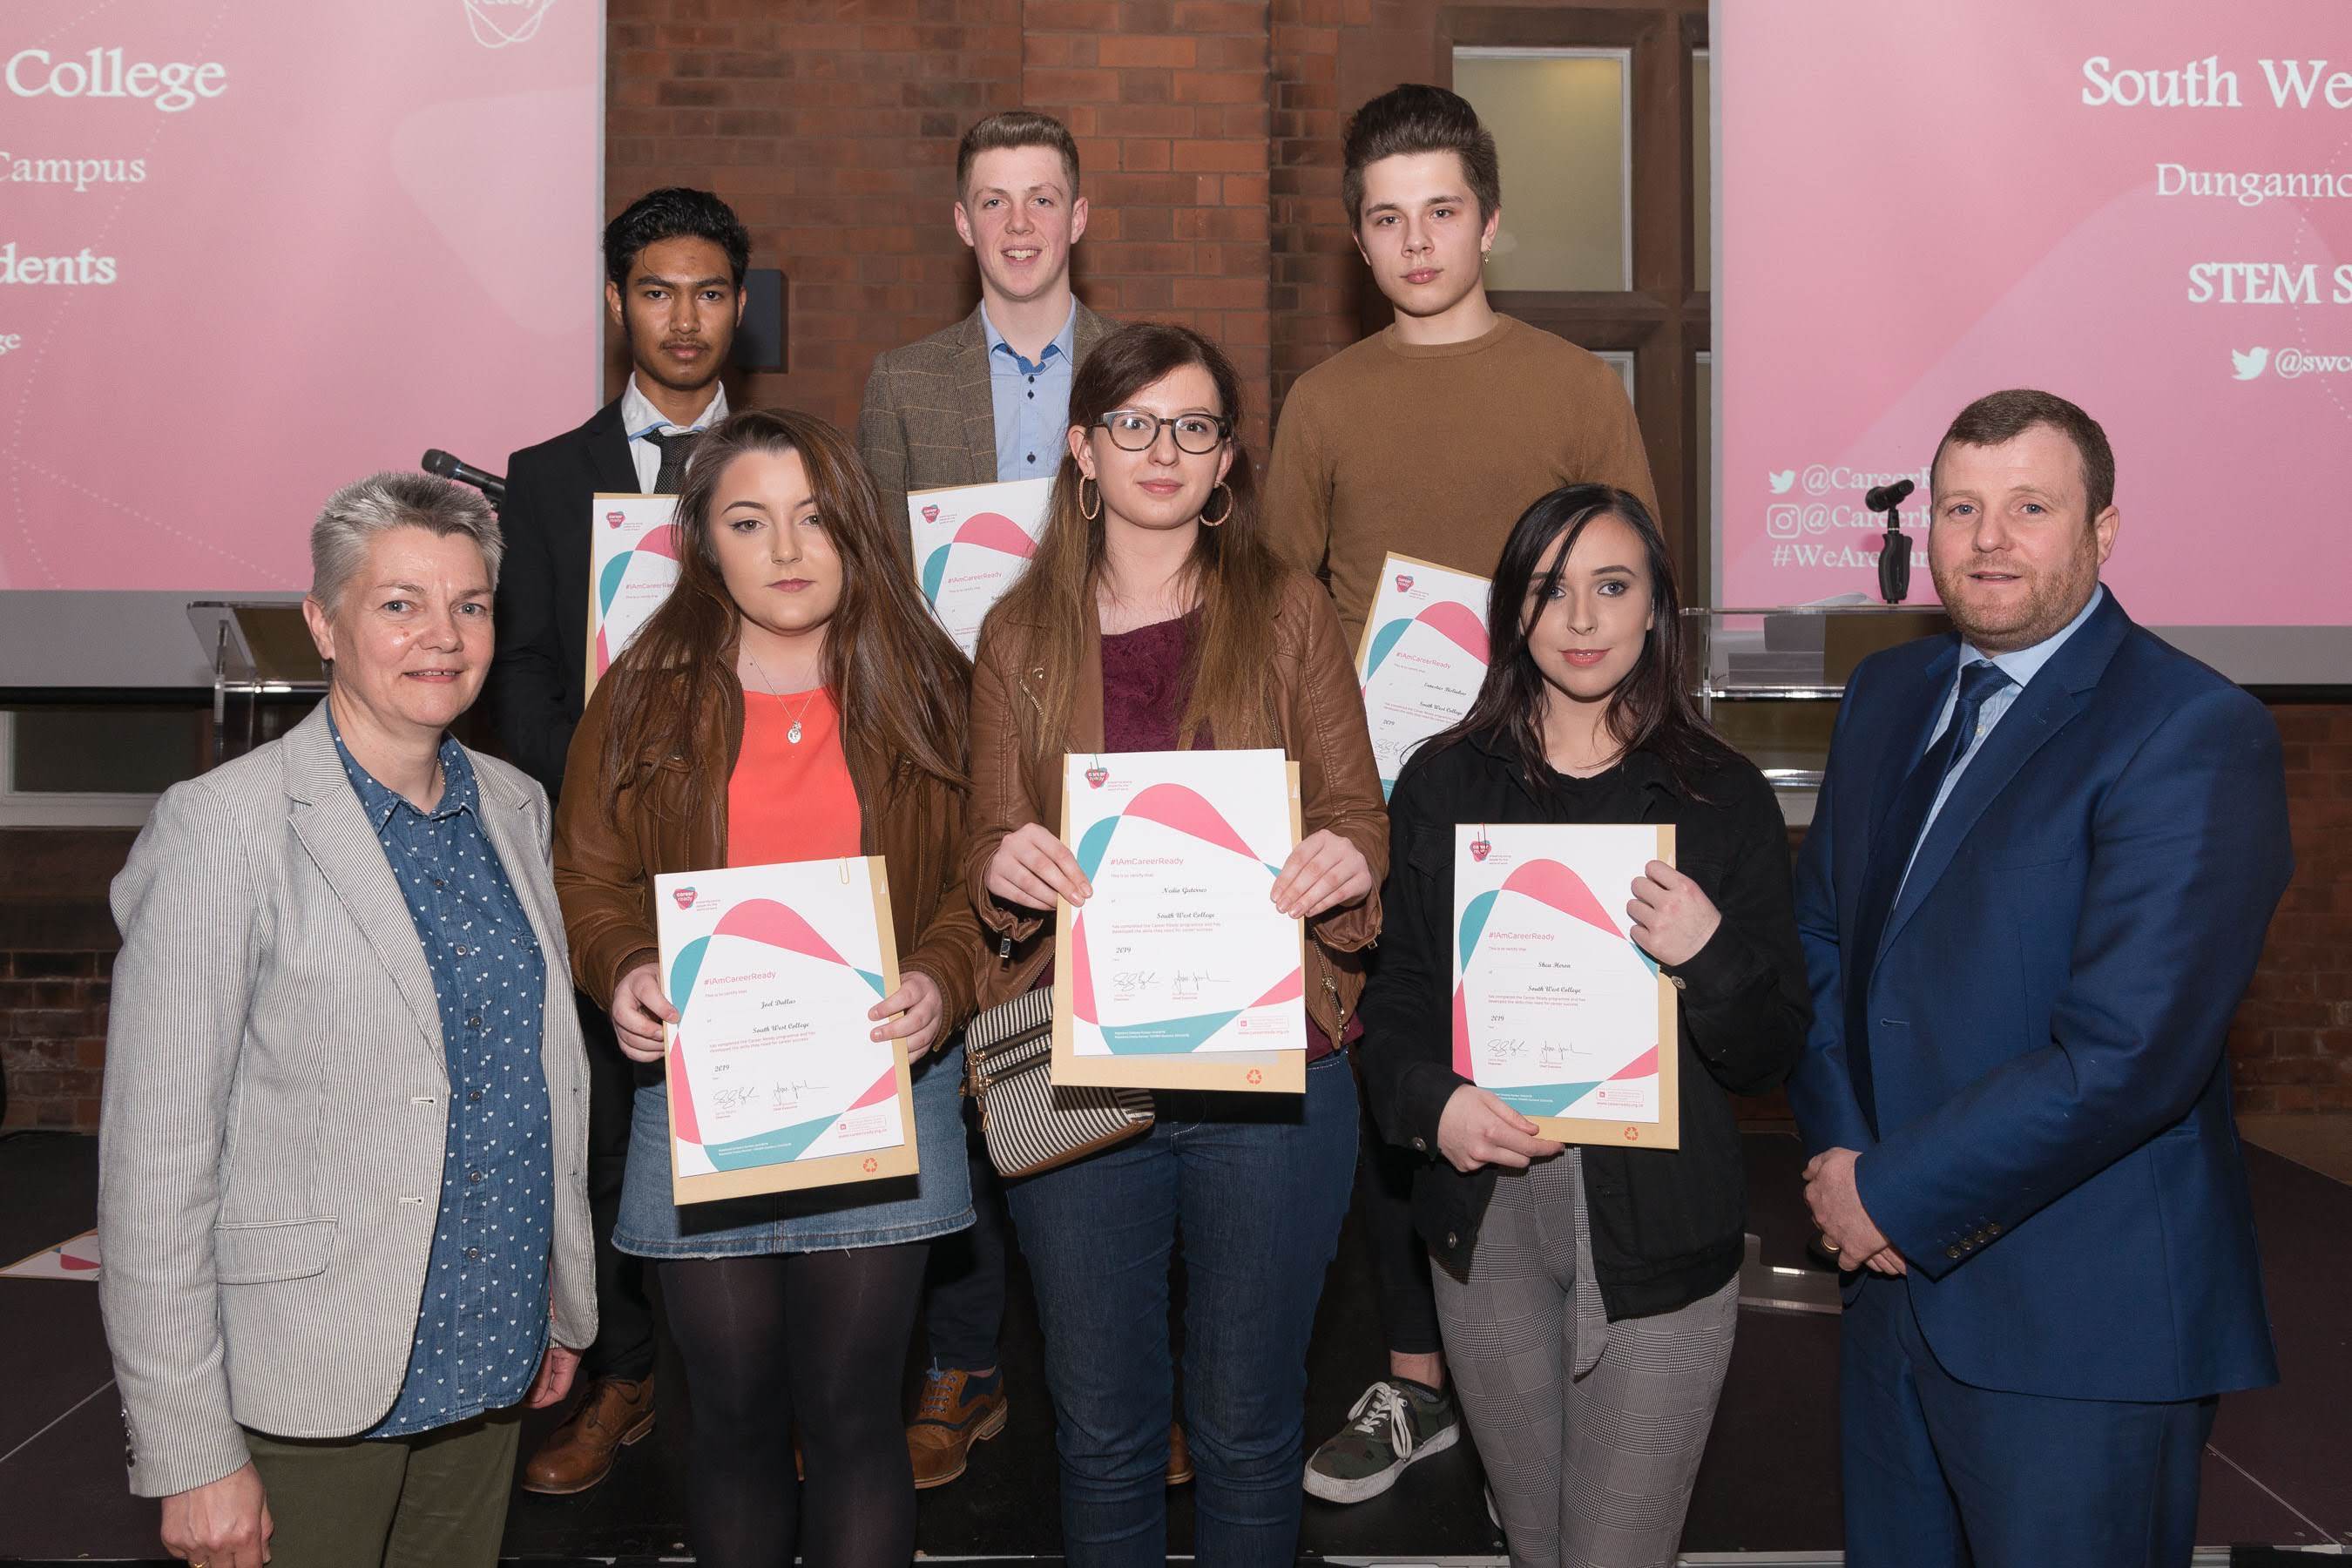 Students Graduate 'Career Ready' | South West College